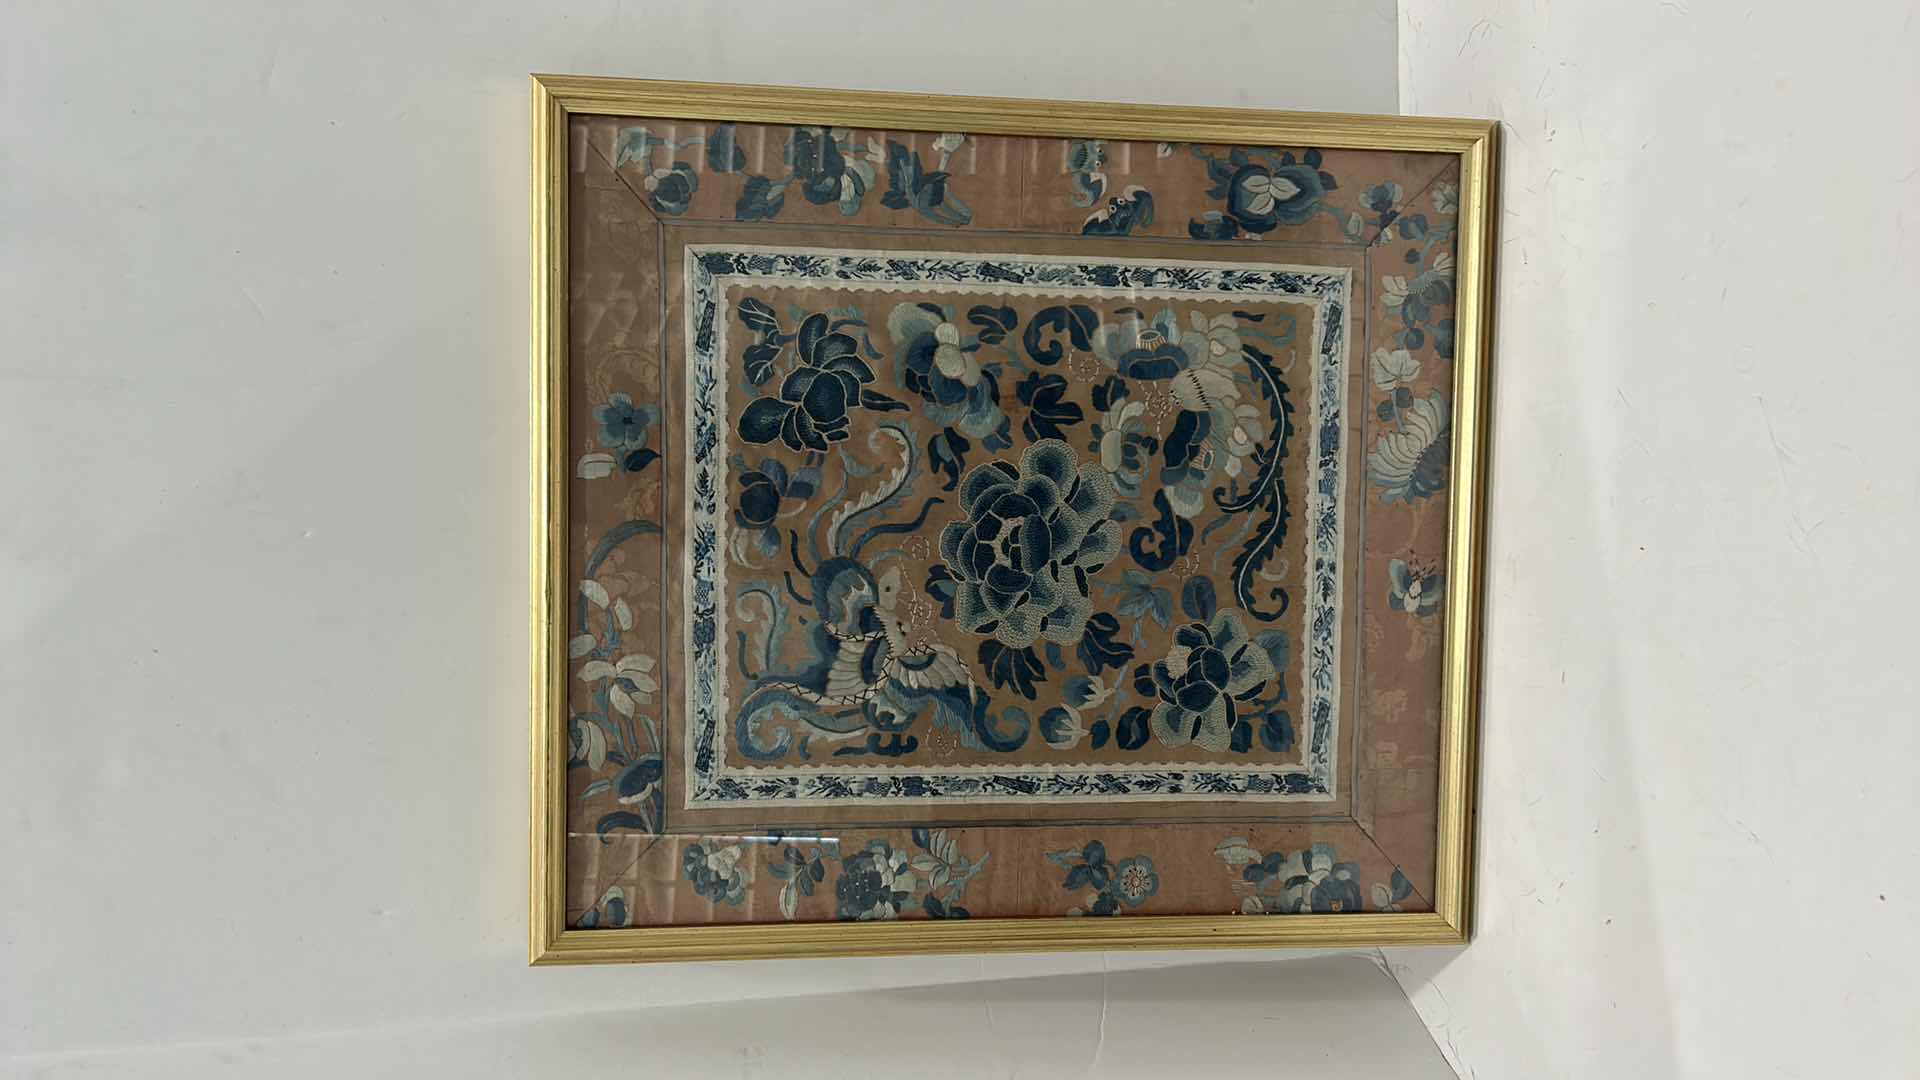 Photo 6 of ANTIQUE CHINESE TEXTILE FABRIC, SILK WITH SILK THREAD HAND EMBROIDERY ARTWORK FRAMED14 1/2” x 17” 16 1/2” x 18 1/2”